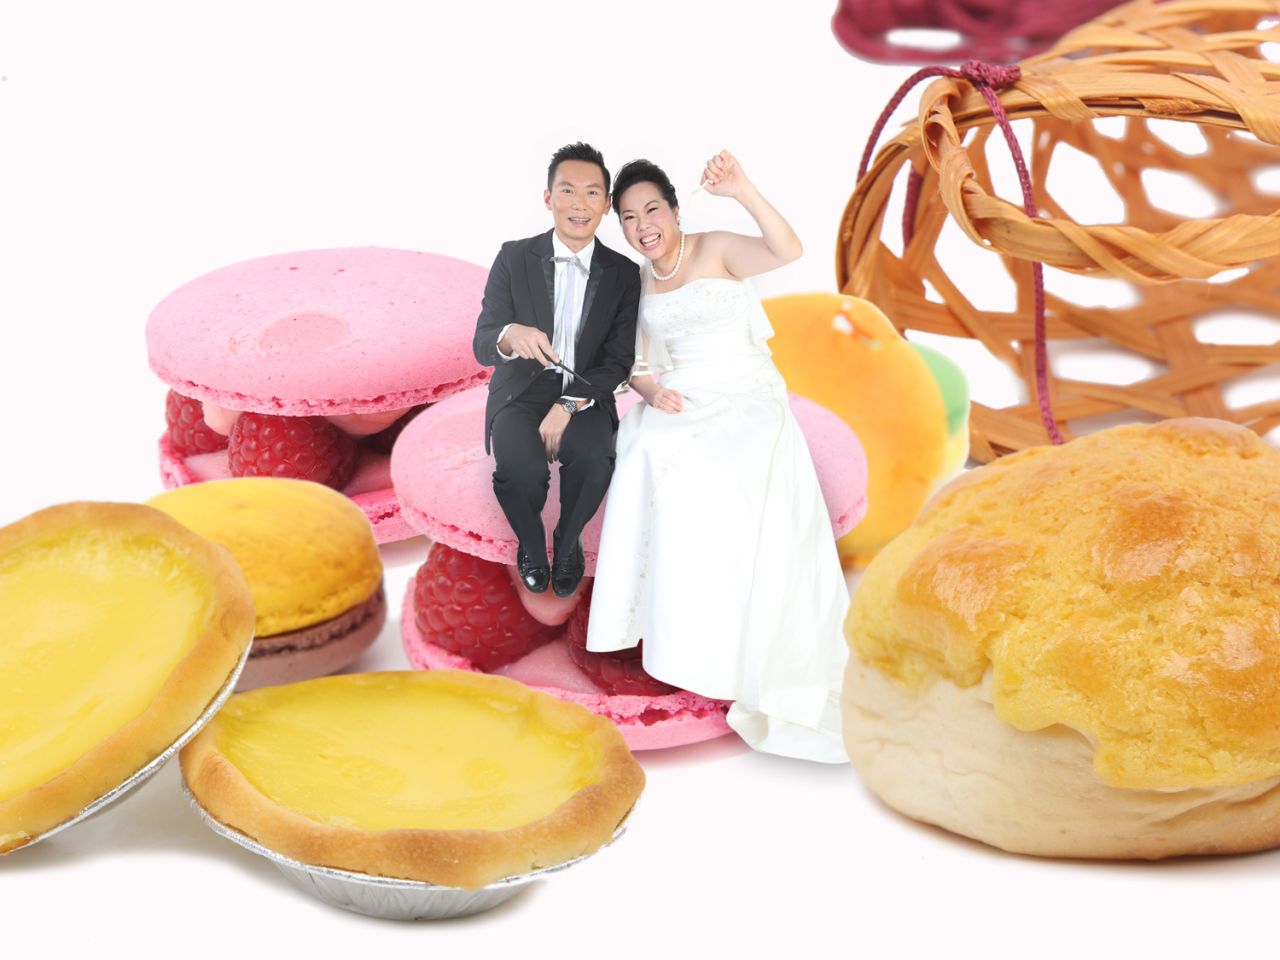 Warning: These are not your average engagement photos. These creative Hong Kong couples sought to portray something distinctive about their personalities, passions, or love stories in their shoots. Here, food-loving couple Daniel Chan and Kim Lee are superimposed on macaroons and Hong Kong pastry favorites -- egg tarts and pineapple buns.